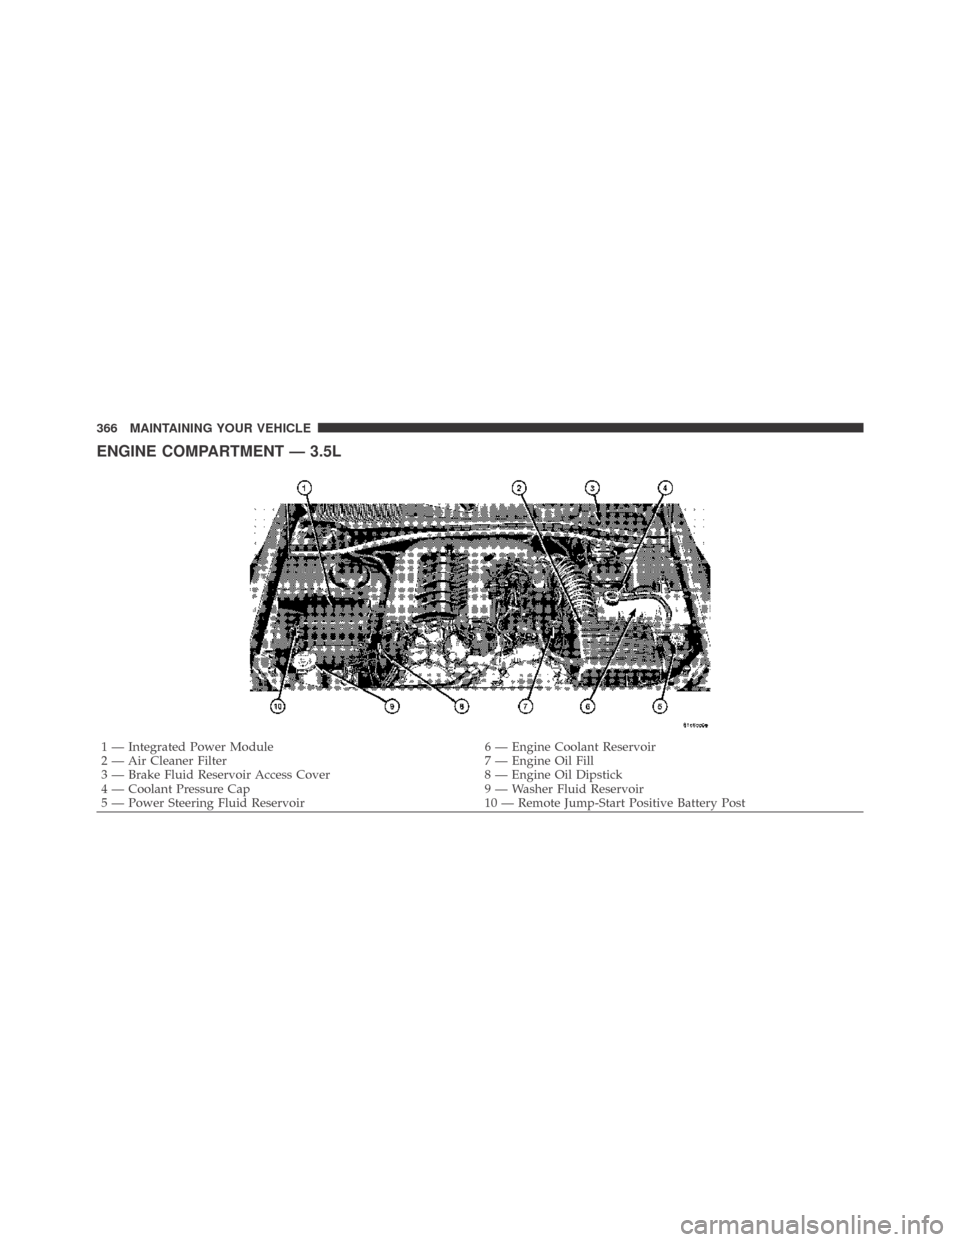 DODGE CHALLENGER 2009 3.G Owners Manual ENGINE COMPARTMENT — 3.5L
1 — Integrated Power Module 6 — Engine Coolant Reservoir
2 — Air Cleaner Filter 7 — Engine Oil Fill
3 — Brake Fluid Reservoir Access Cover 8 — Engine Oil Dipsti